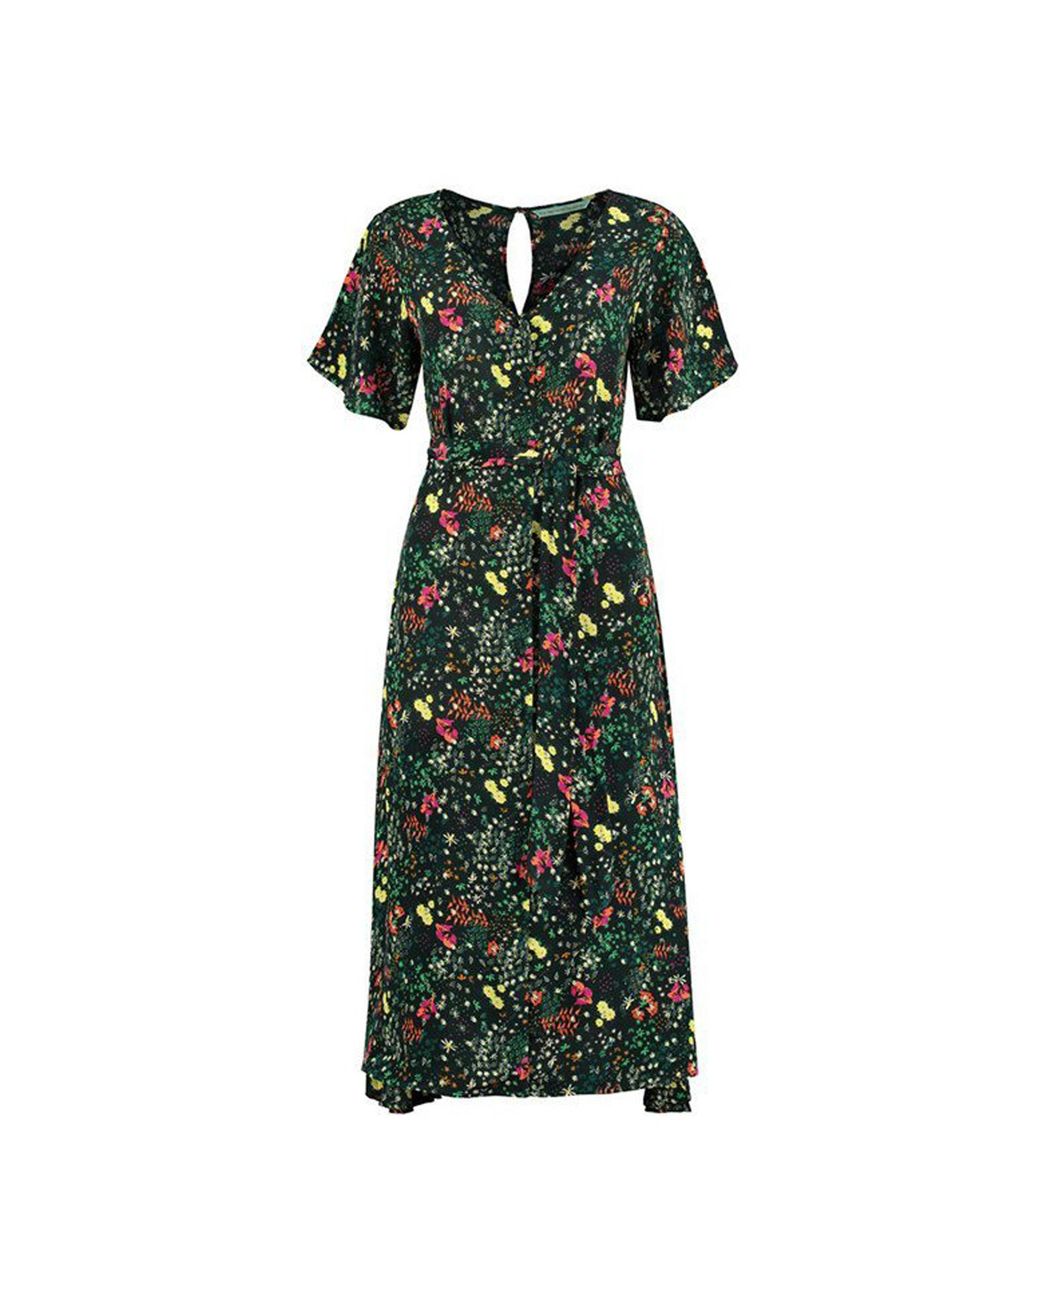 POM Amsterdam Synthetic Midi-dress in Floral (Green) - Lyst